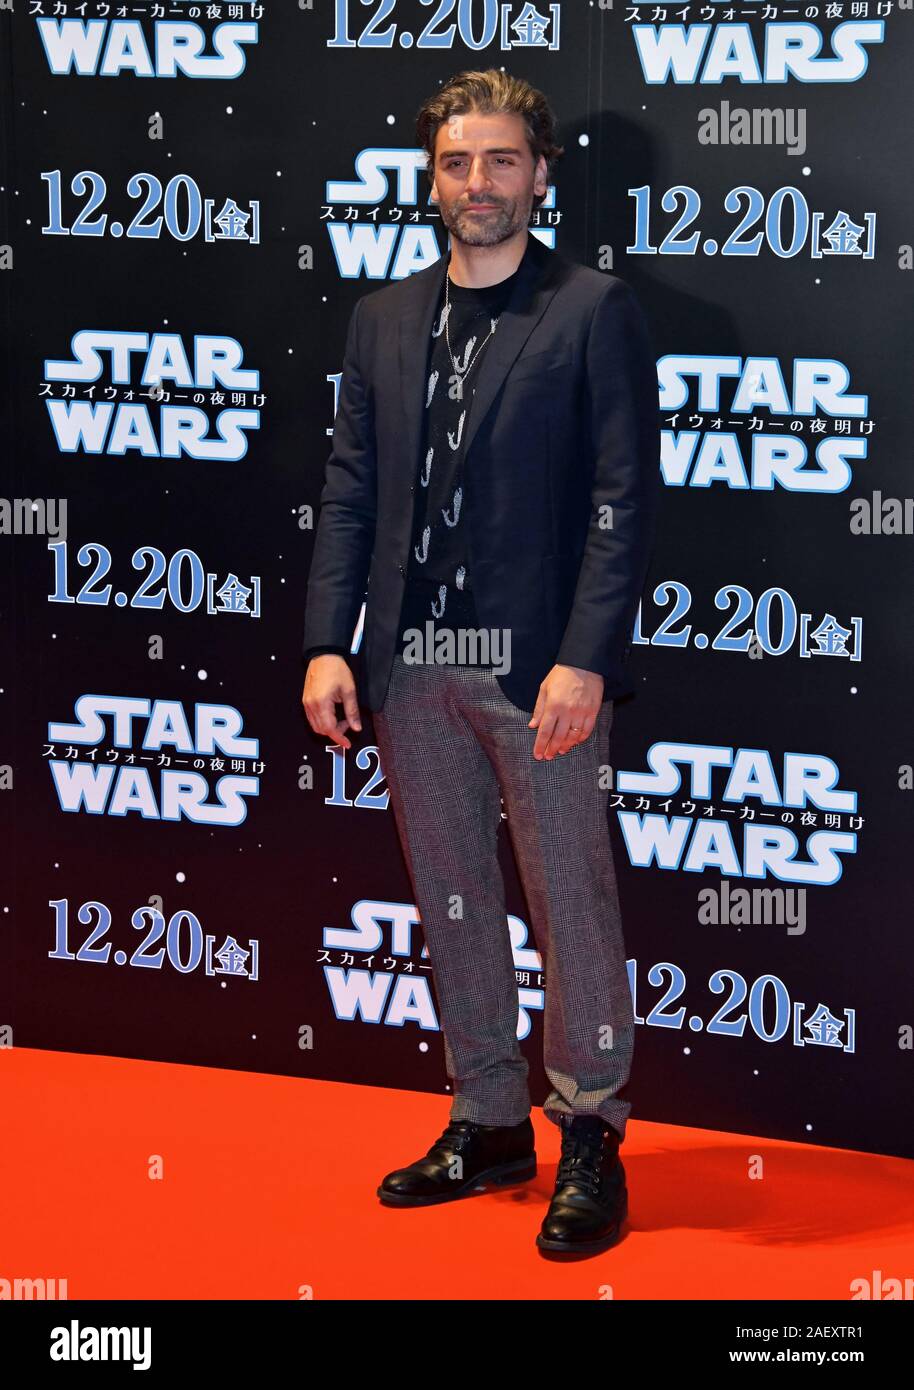 Tokyo, Japan. 11th Dec, 2019. Actor Oscar Isaac attends the Japan premiere for the film 'Star Wars: The Rise of Skywalker' in Tokyo, Japan on Wednesday, December 11, 2019. This film will open on December 20th in the world. Prior to this, special screening will be held at Hokkaido, Tokyo, Aichi, Osaka and Fukuoka in Japan on December 19th. Credit: UPI/Alamy Live News Stock Photo